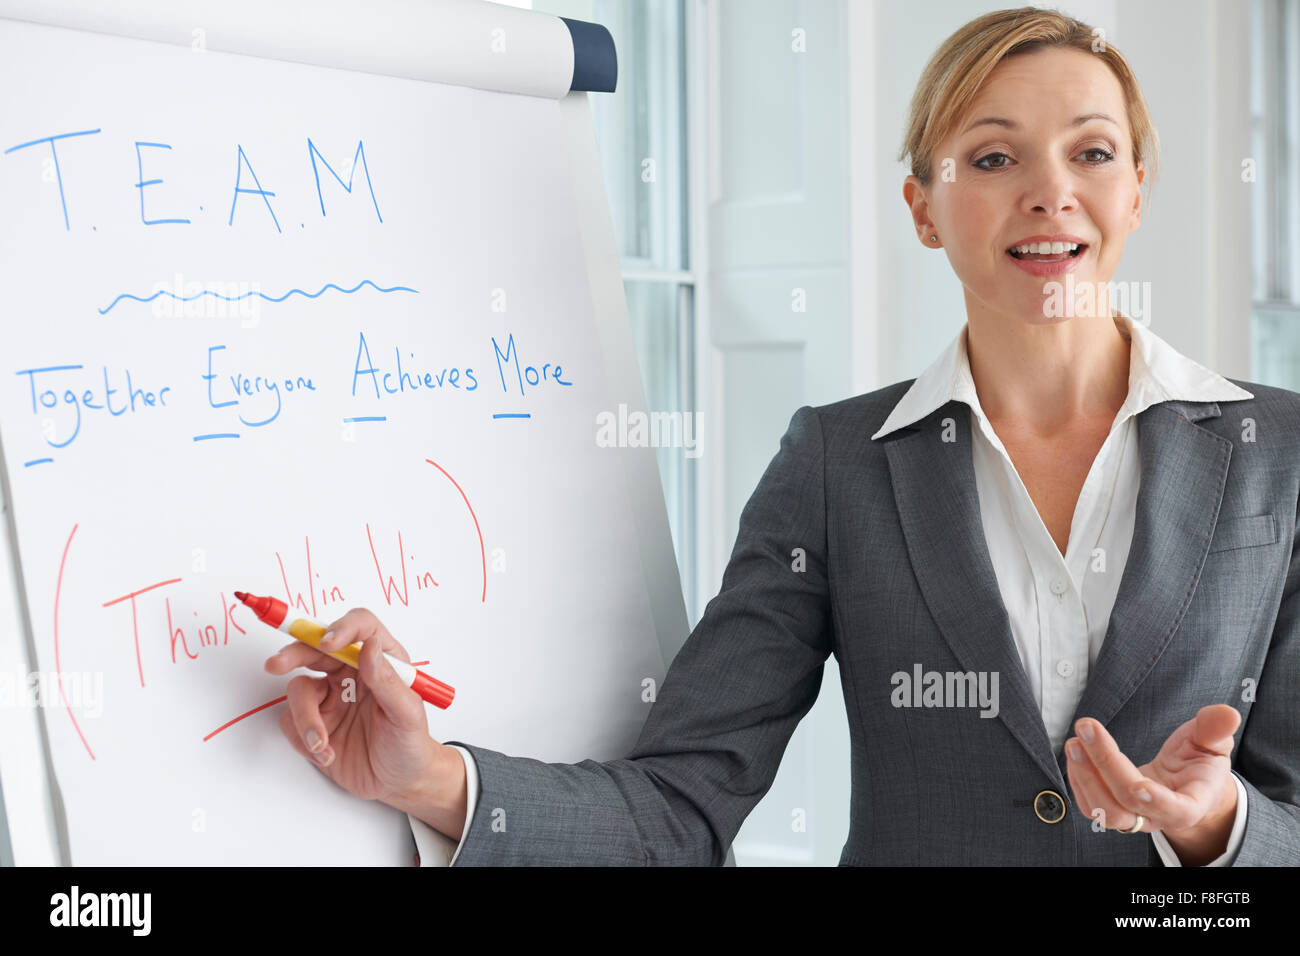 Businesswoman Standing At Flipchart Delivering Presentation Stock Photo